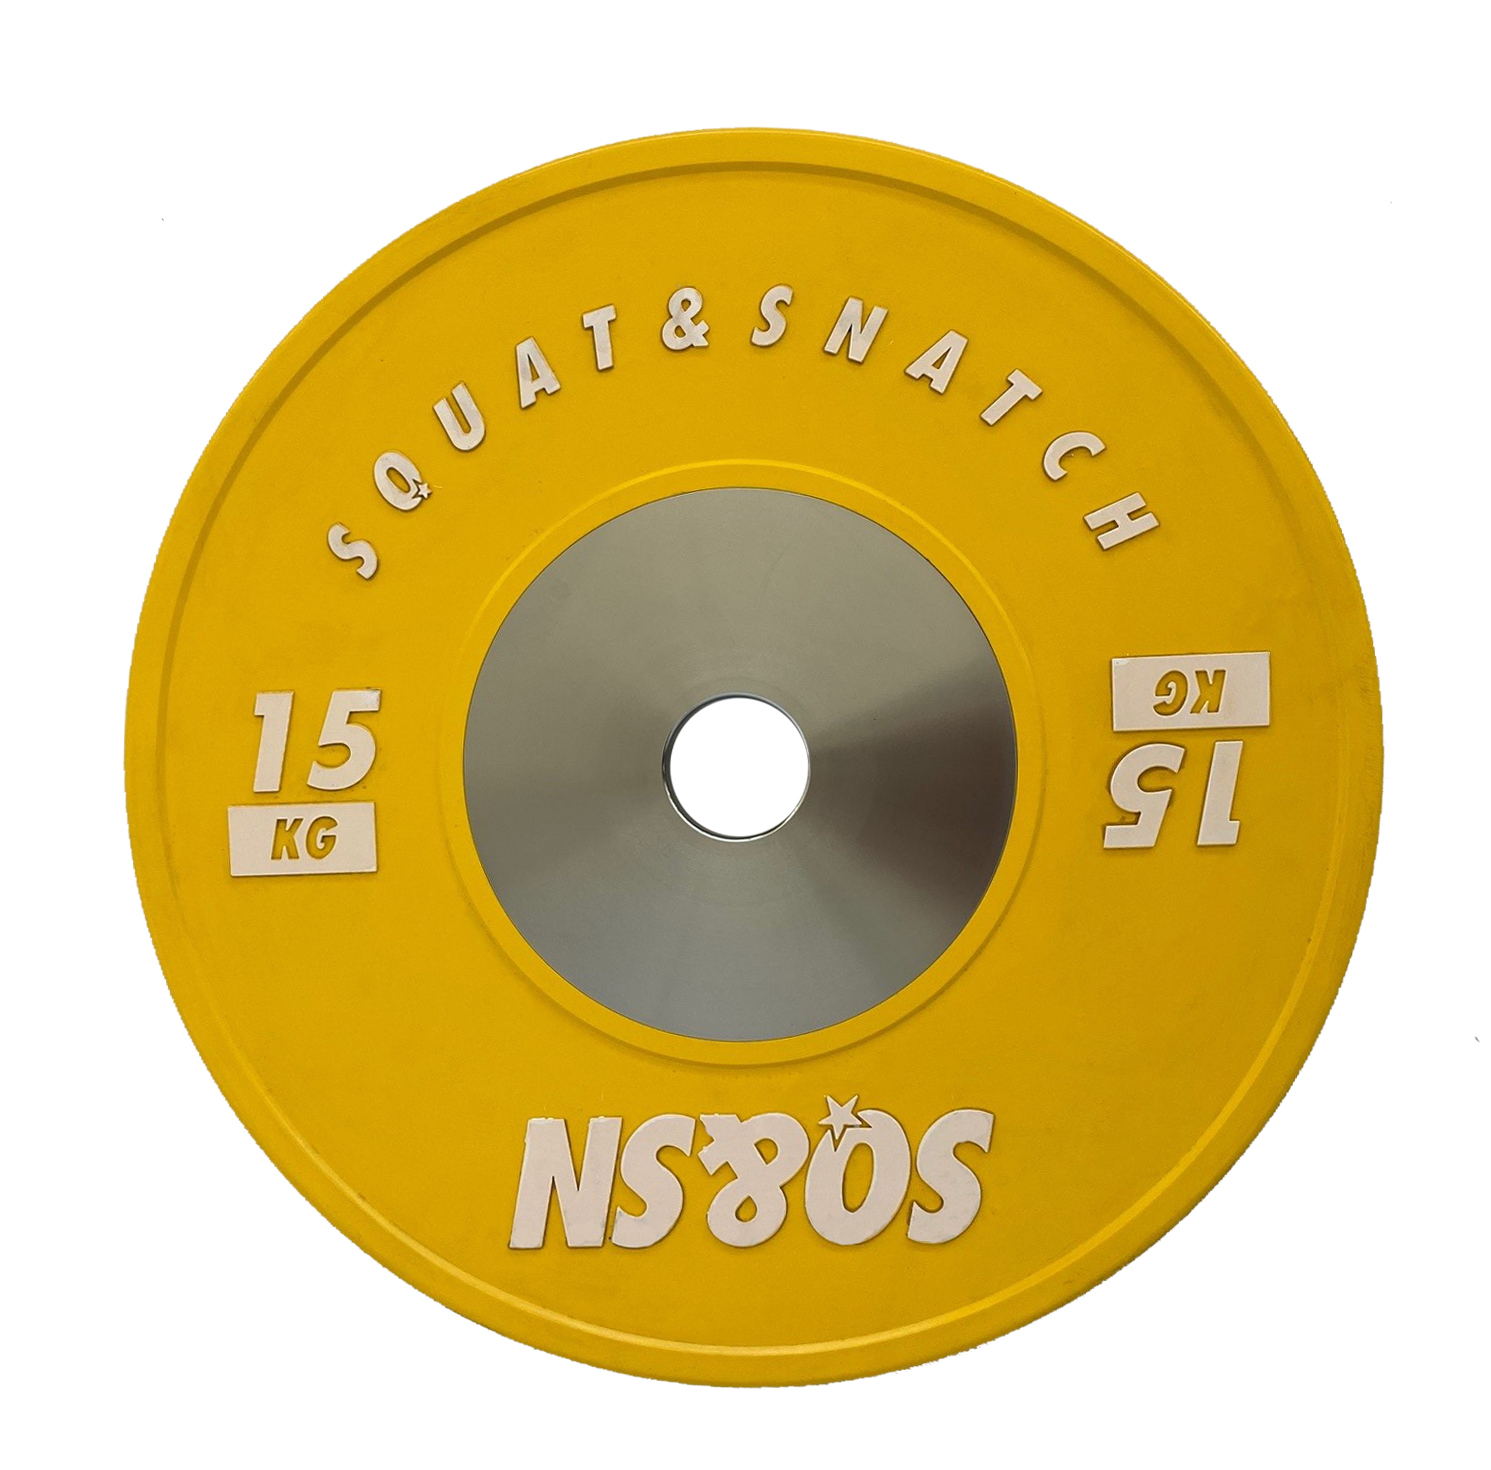 SQ&SN Competition Bumper Plate 15 kg Yellow thumbnail